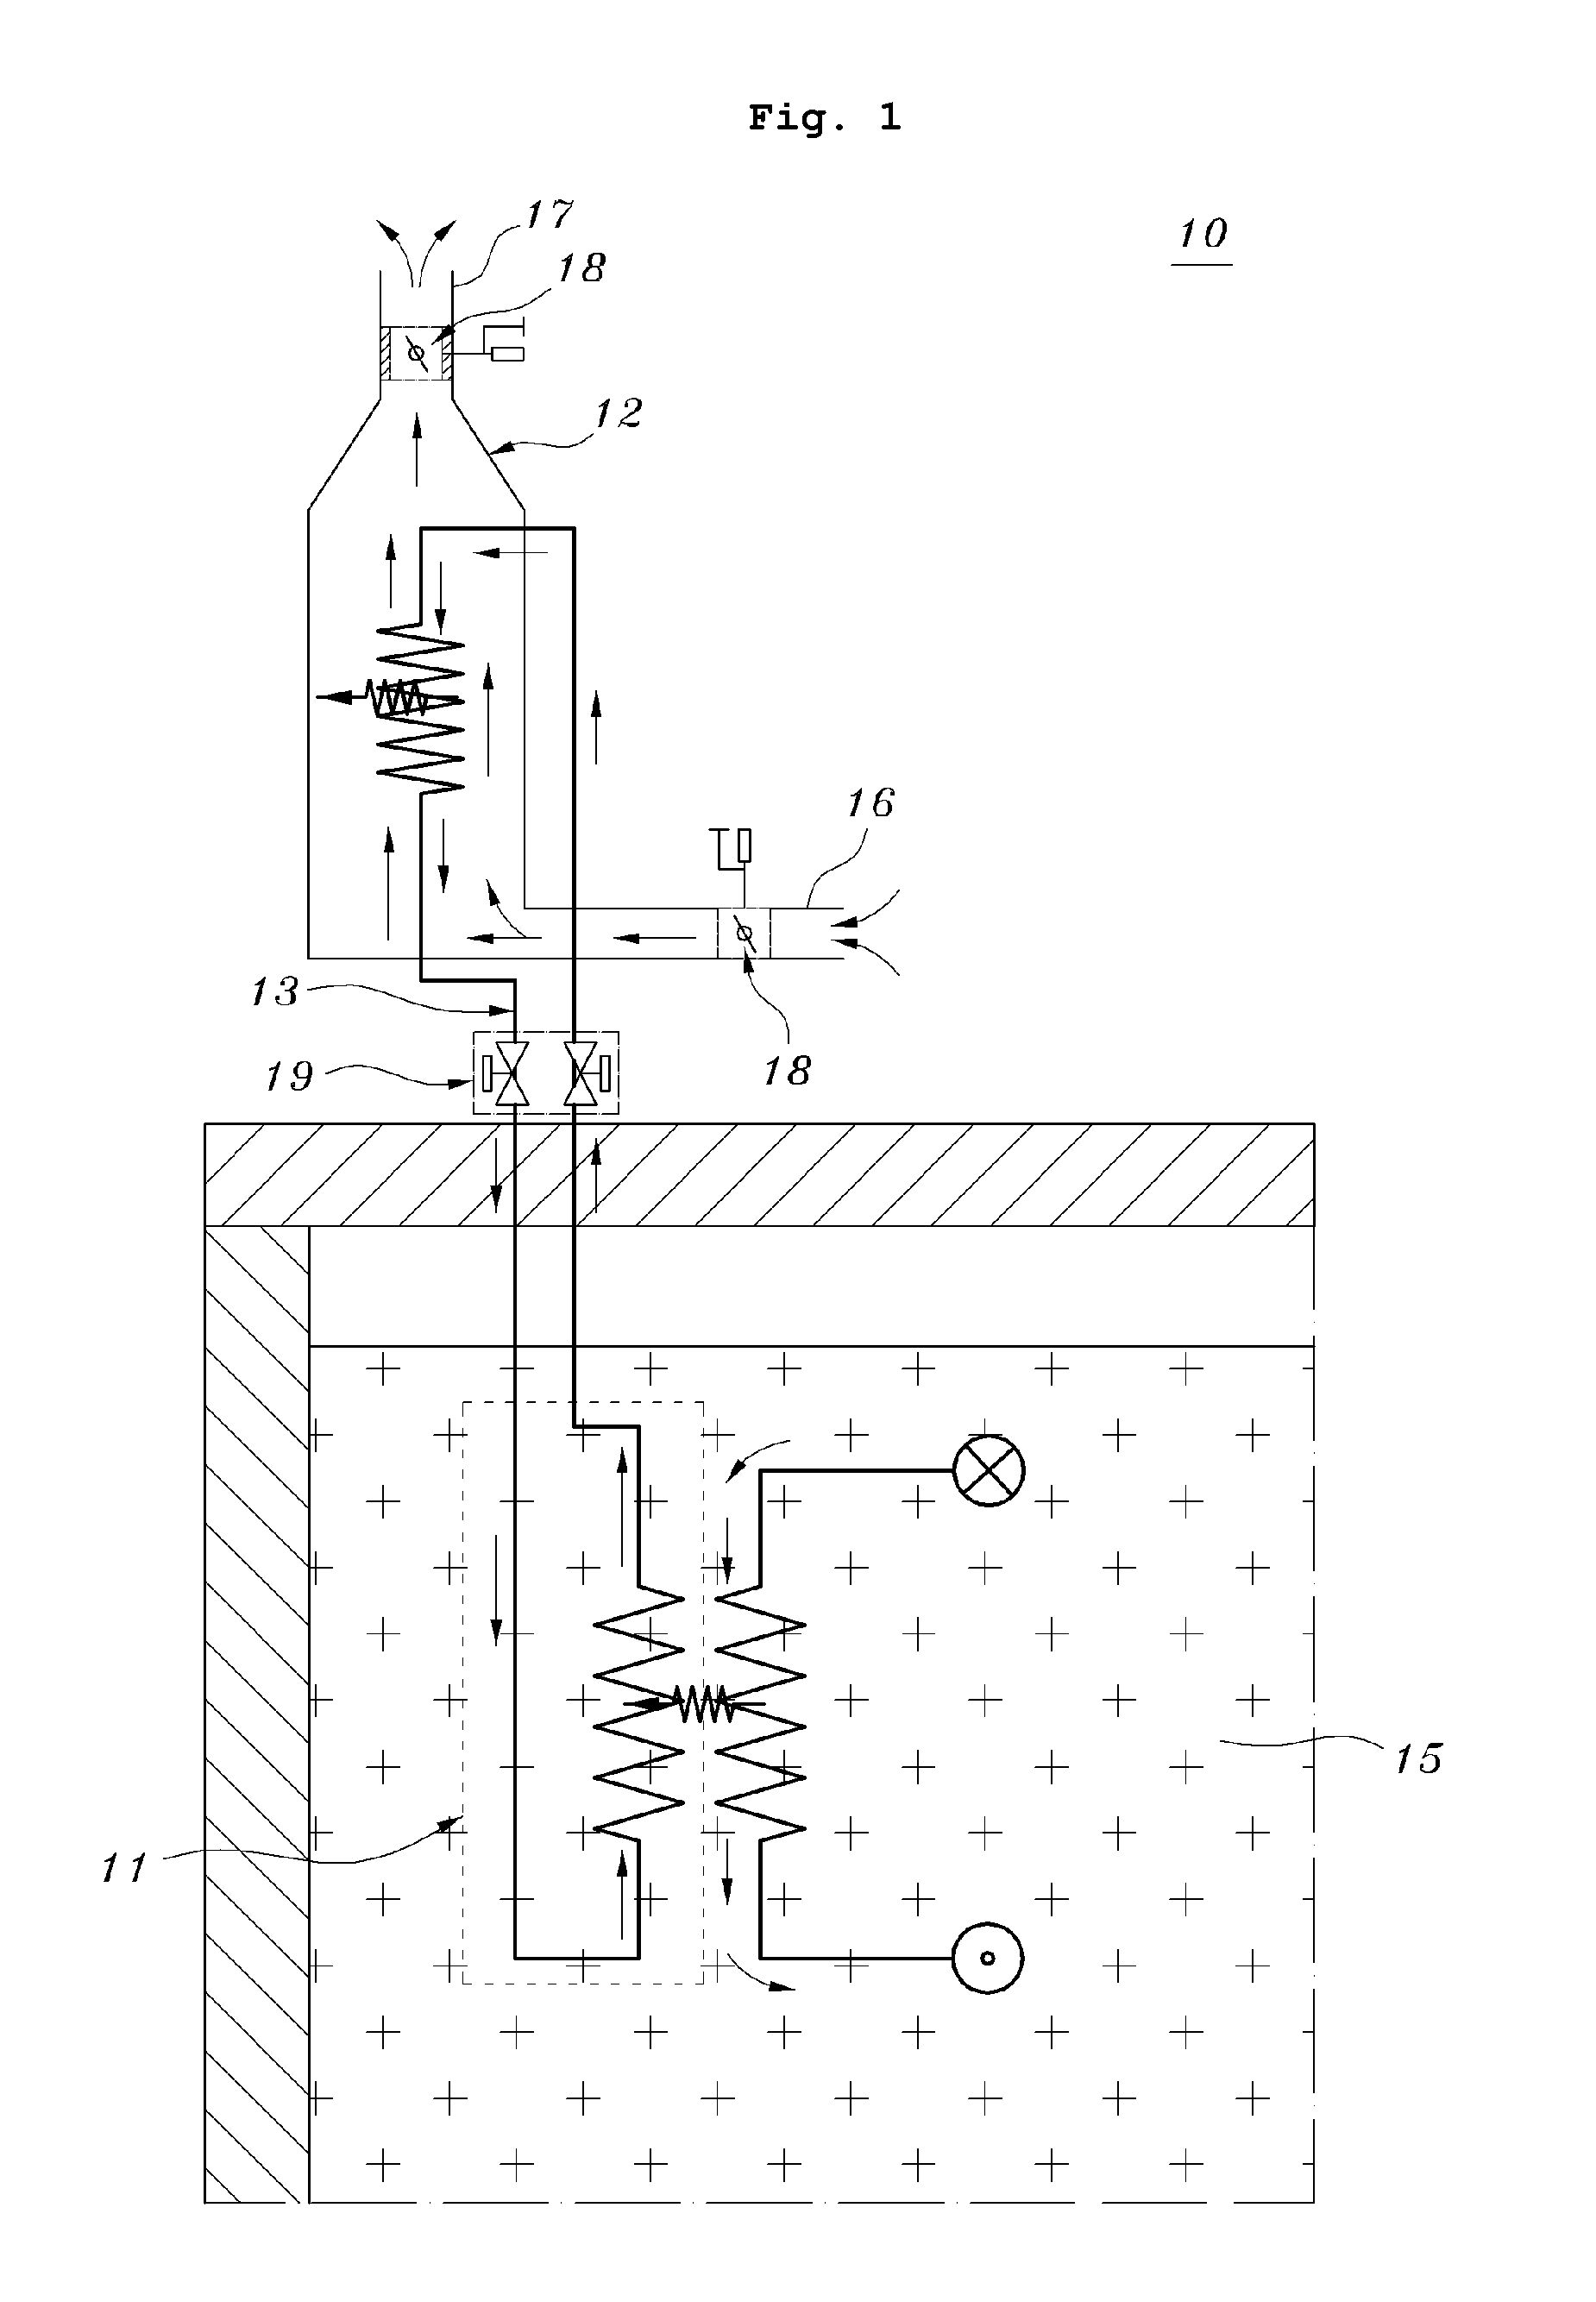 Decay heat removal system comprising heat pipe heat exchanger